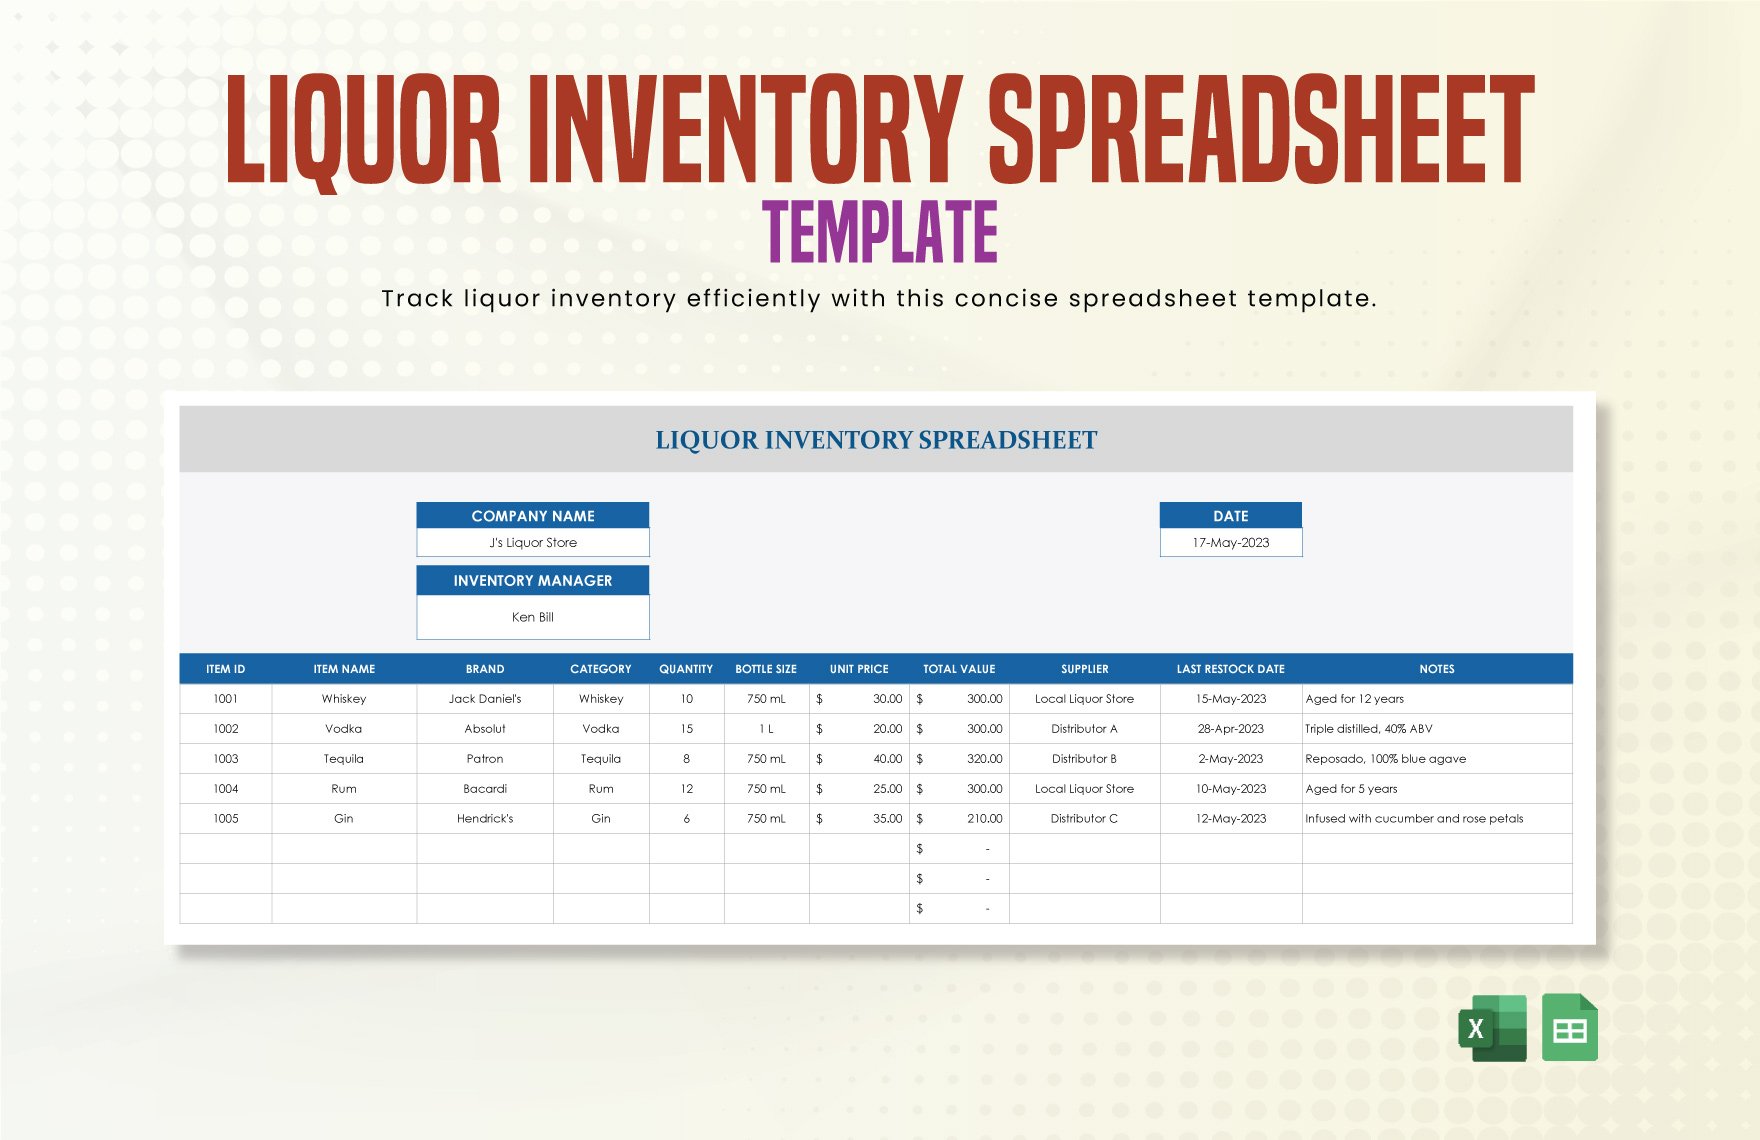 Liquor Inventory Spreadsheet Template in Excel, Google Sheets